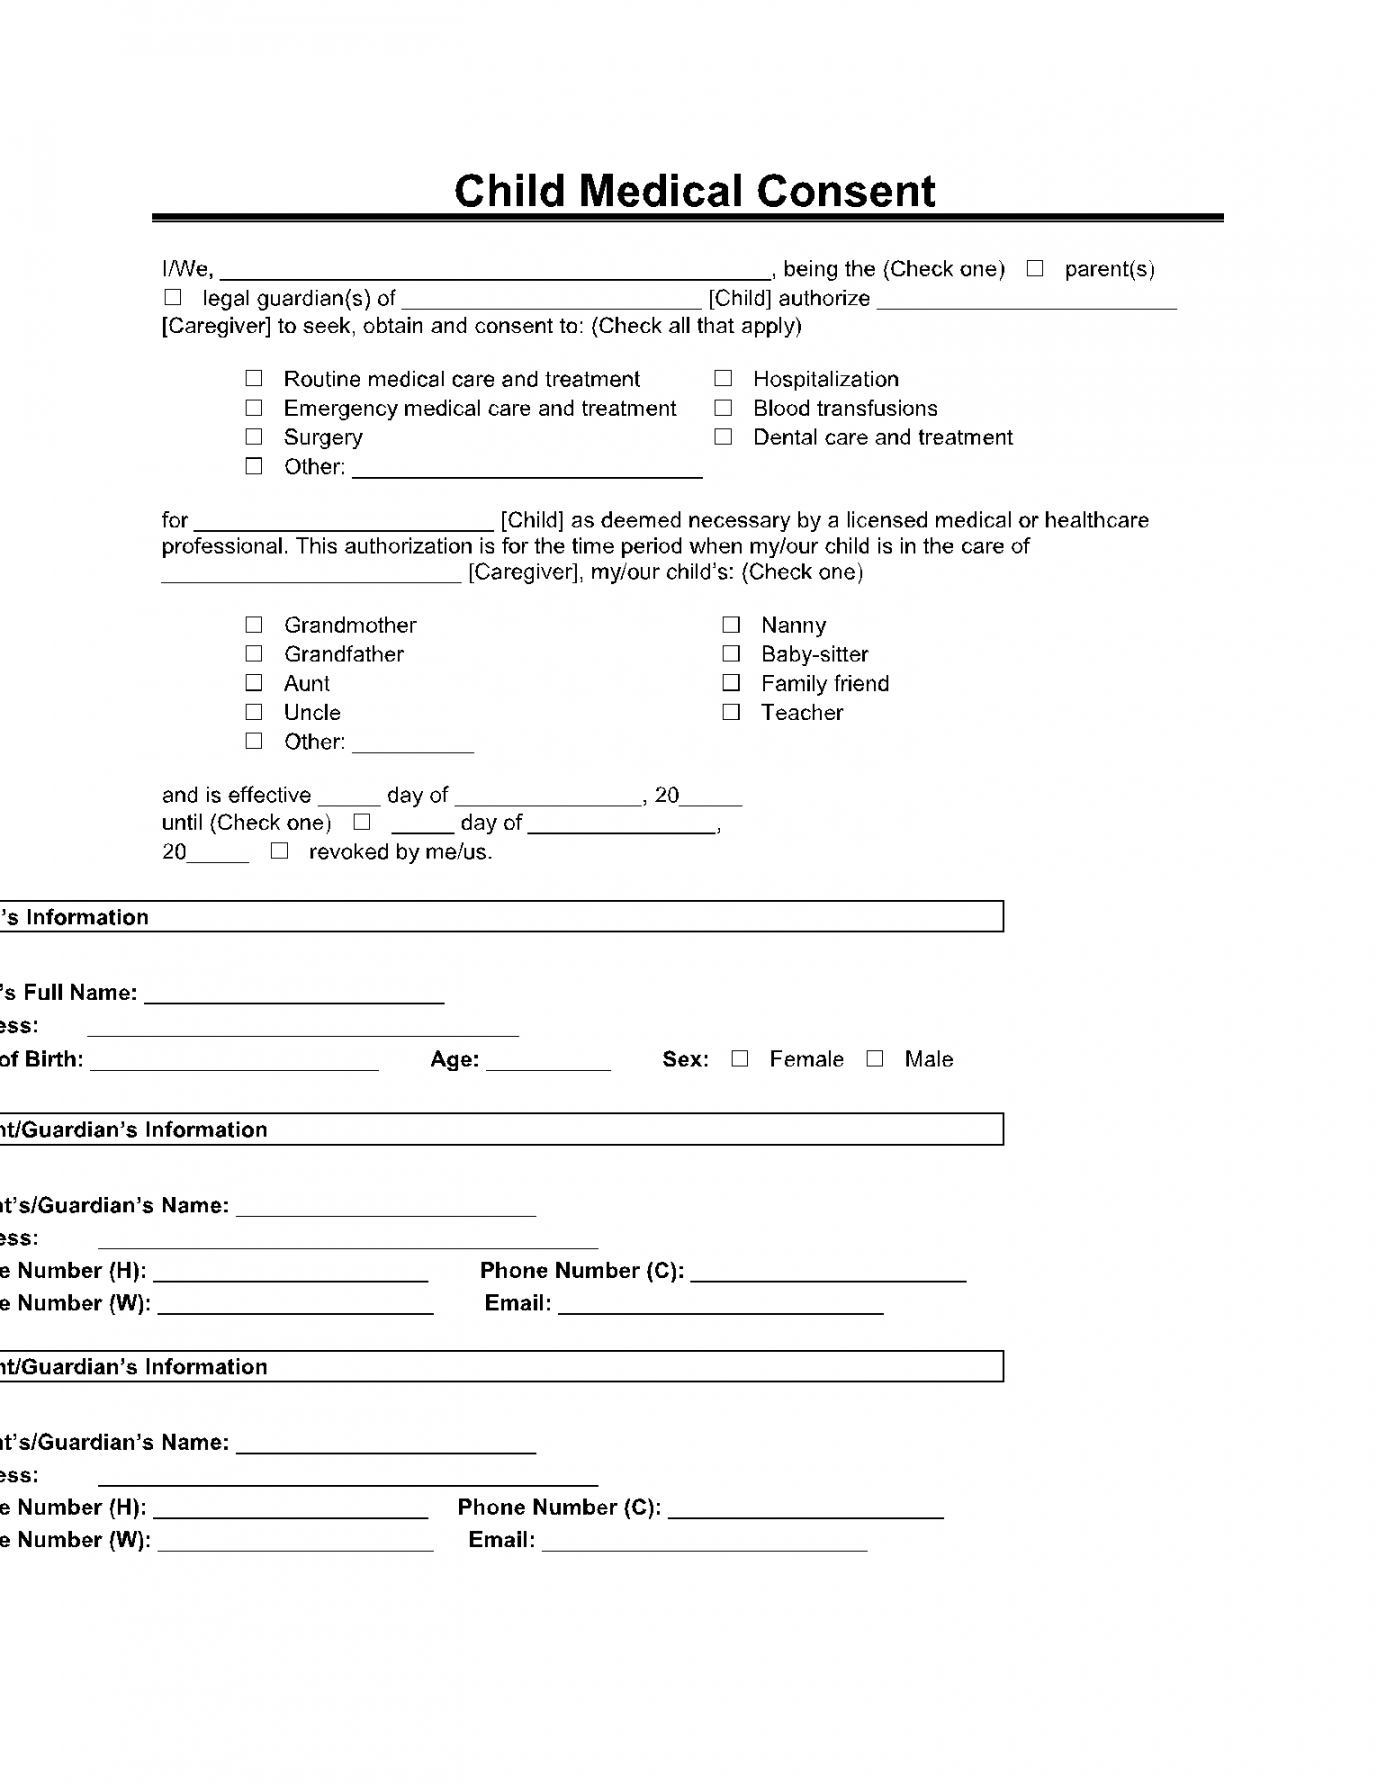 Free Minor (Child) Medical Consent Form Template  CocoSign - FREE Printables - Free Printable Child Medical Consent Form For Grandparents